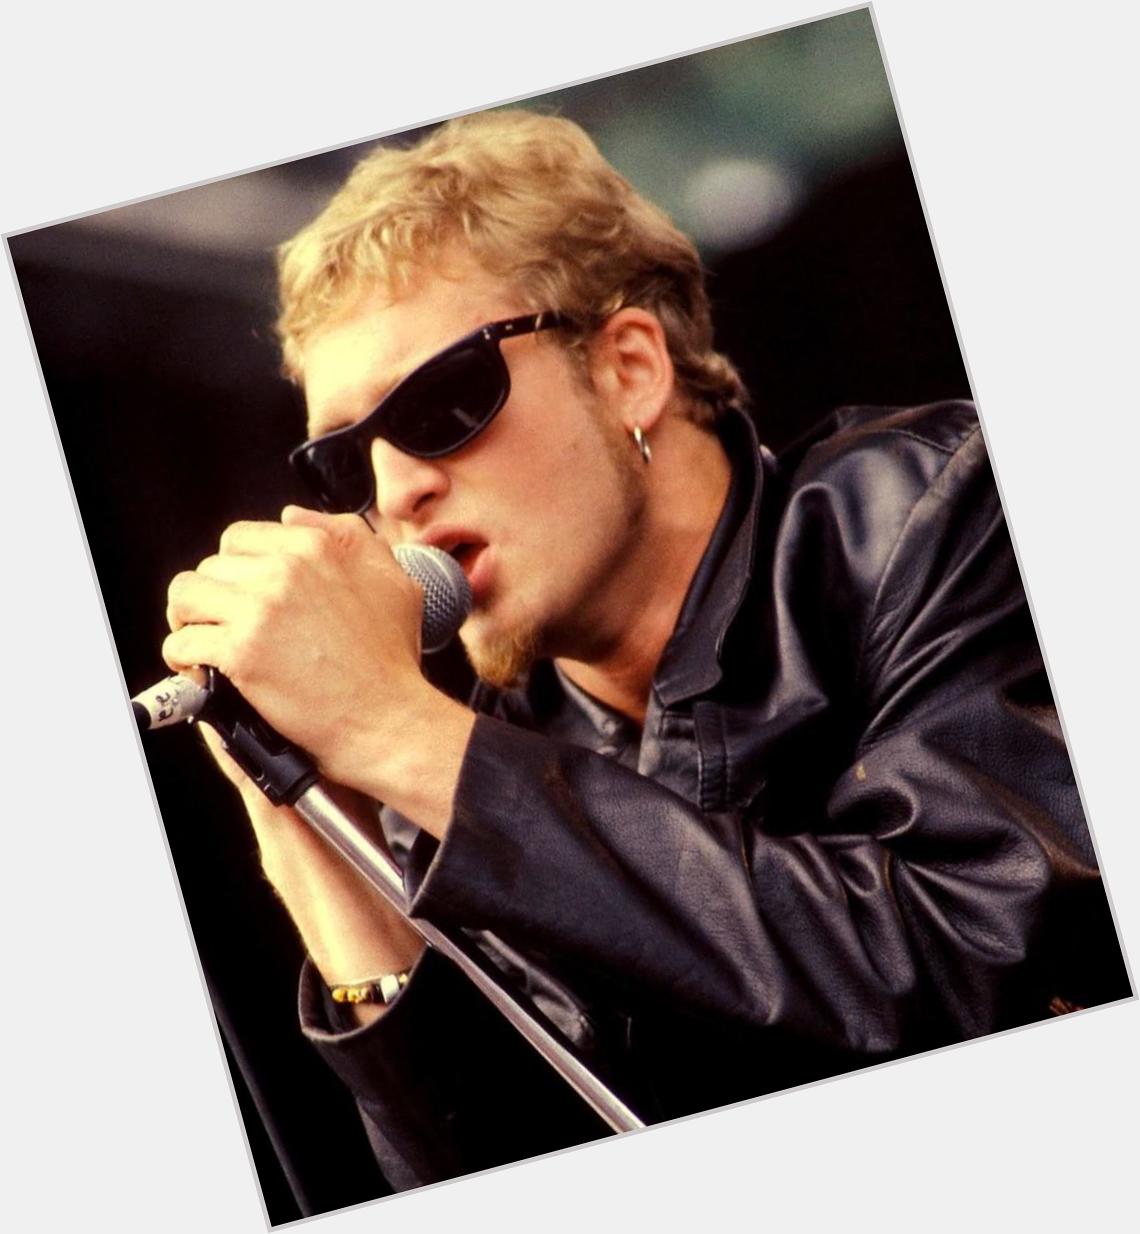 Happy birthday Layne Staley. You\re responsible for one of my all time favorite albums ever. Thanks man. RIP 